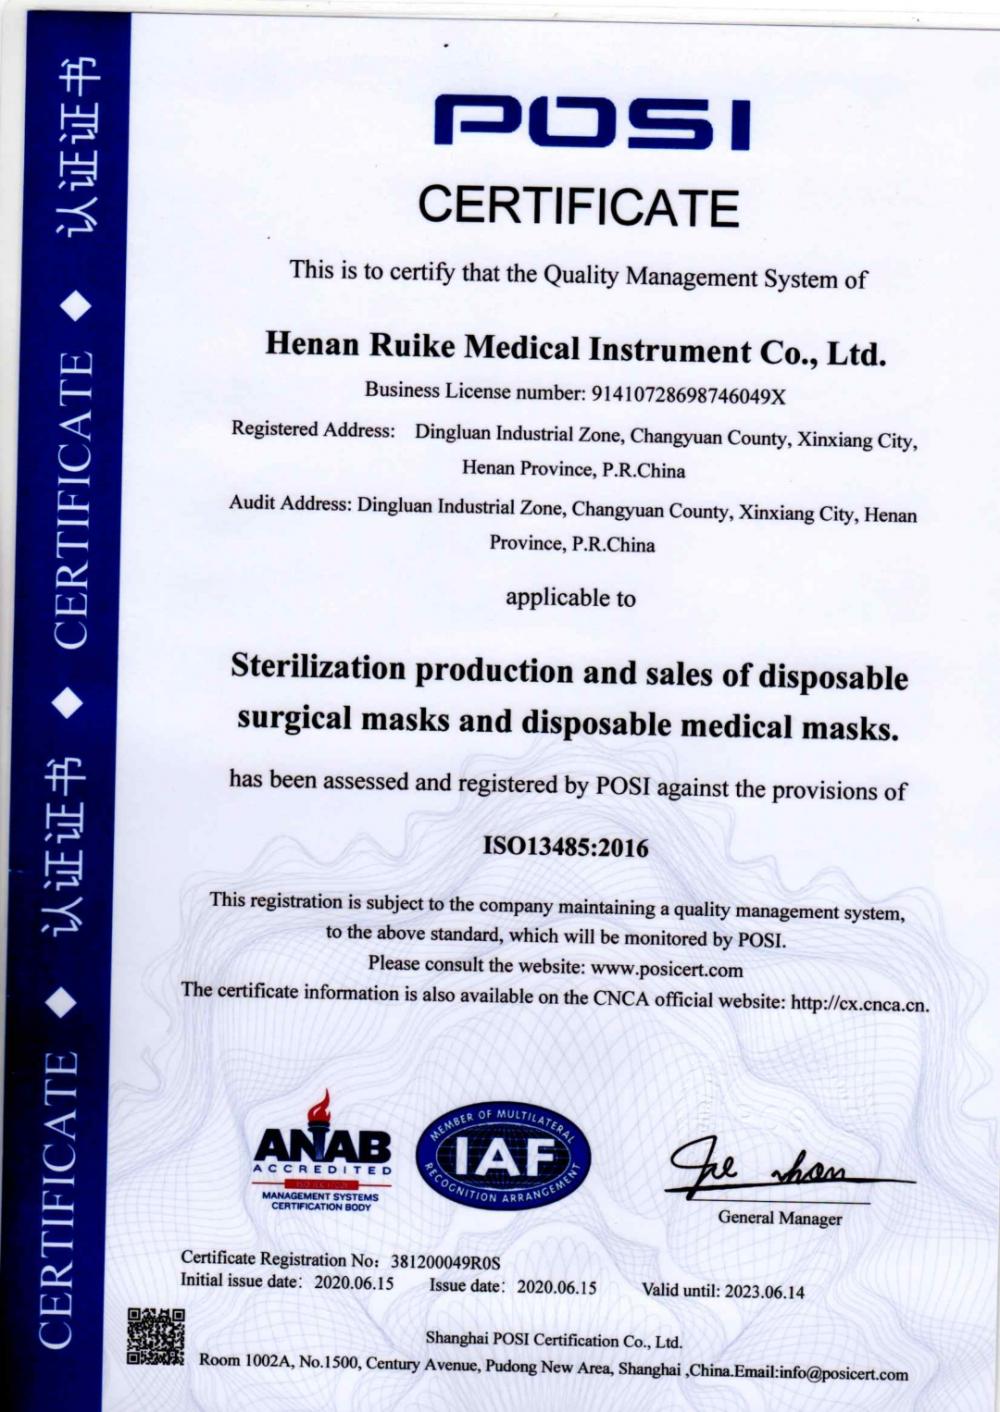 This is certify that the Quality Management System of